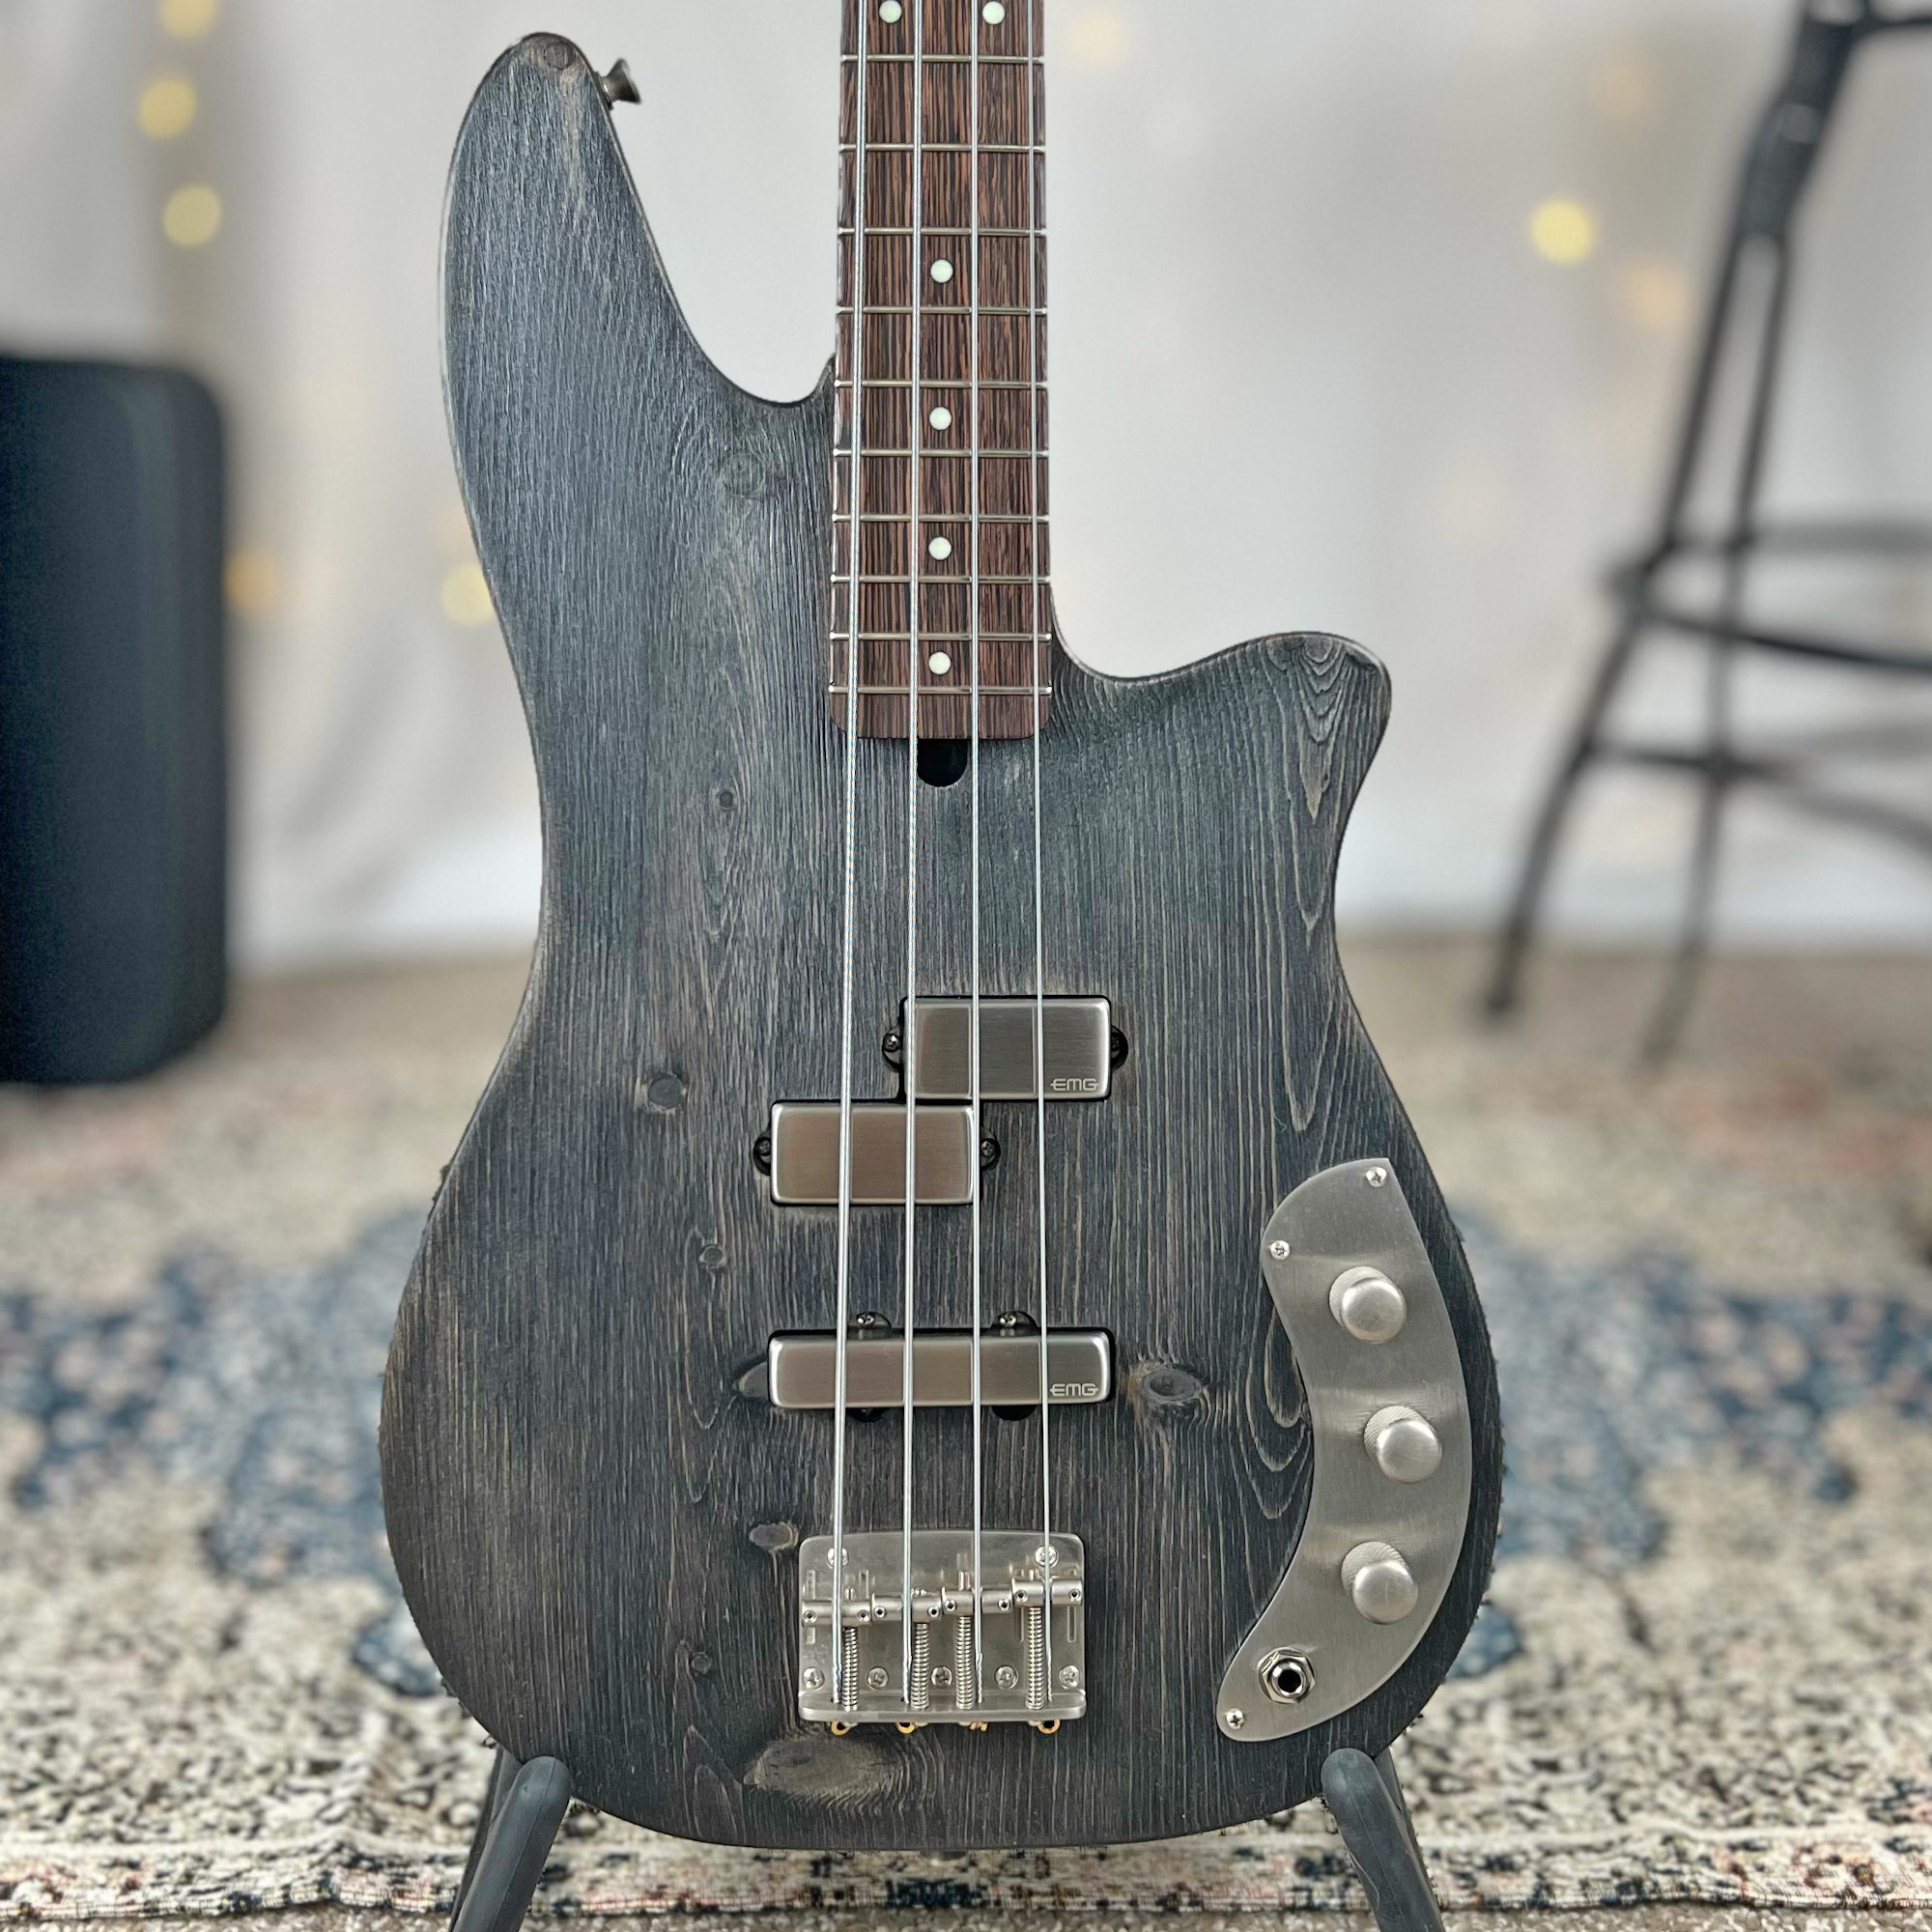 Roxanne PJ 32" Medium-Scale Bass in Charcoal on Textured Pine with EMG PJ Pickup Set